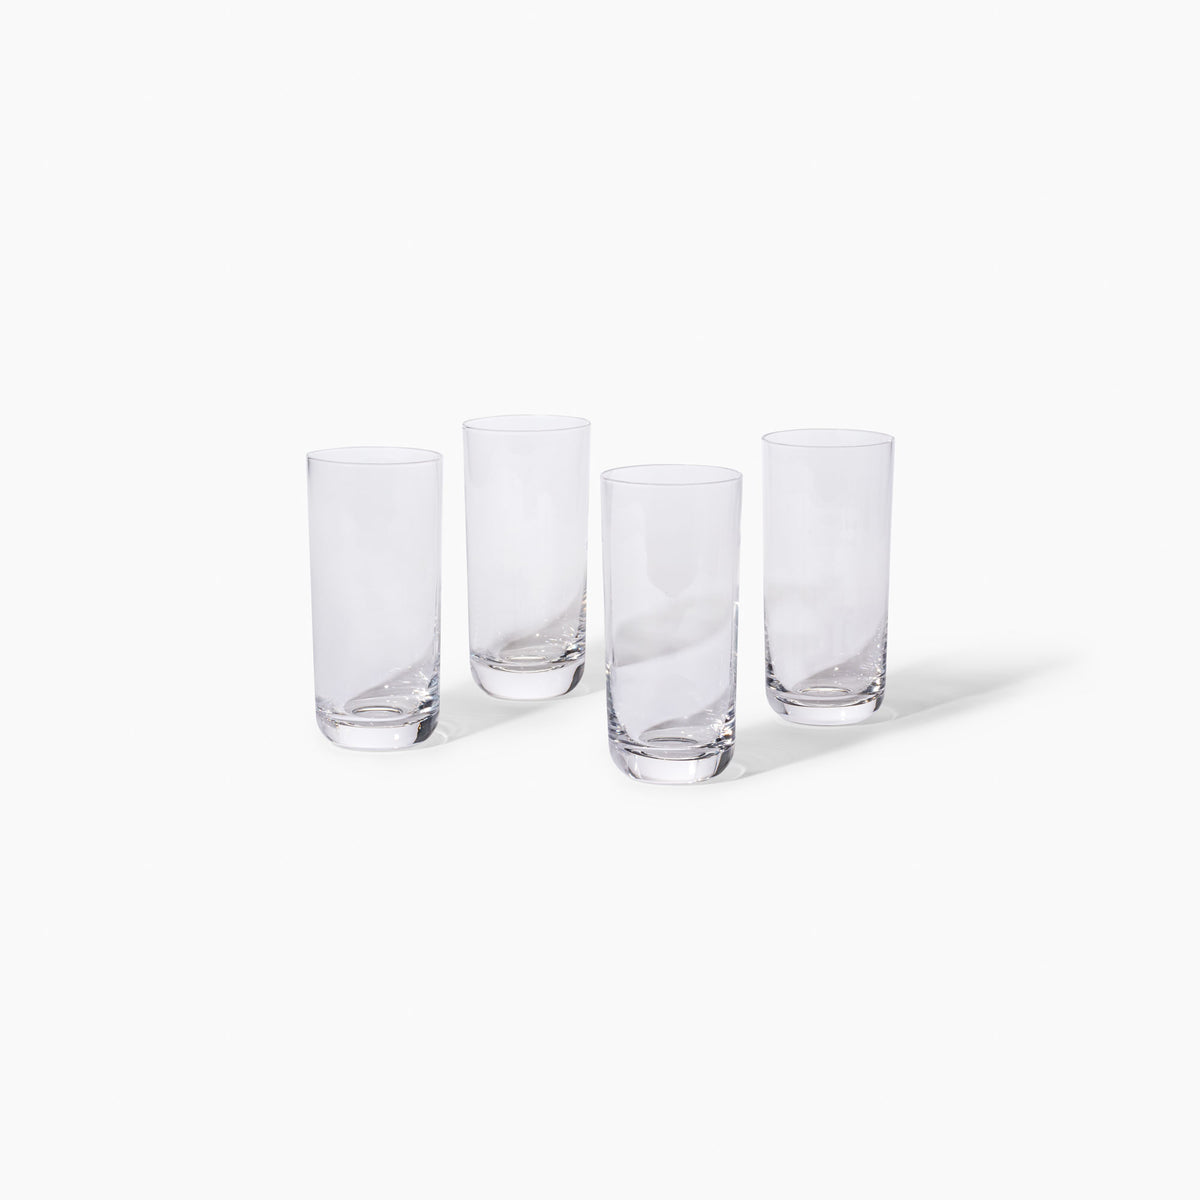 LEYU Highball Drinking Glasses Set of 4, Lead-Free Water Glasses. 13oz Tall  Drink Glasses for Tom Co…See more LEYU Highball Drinking Glasses Set of 4